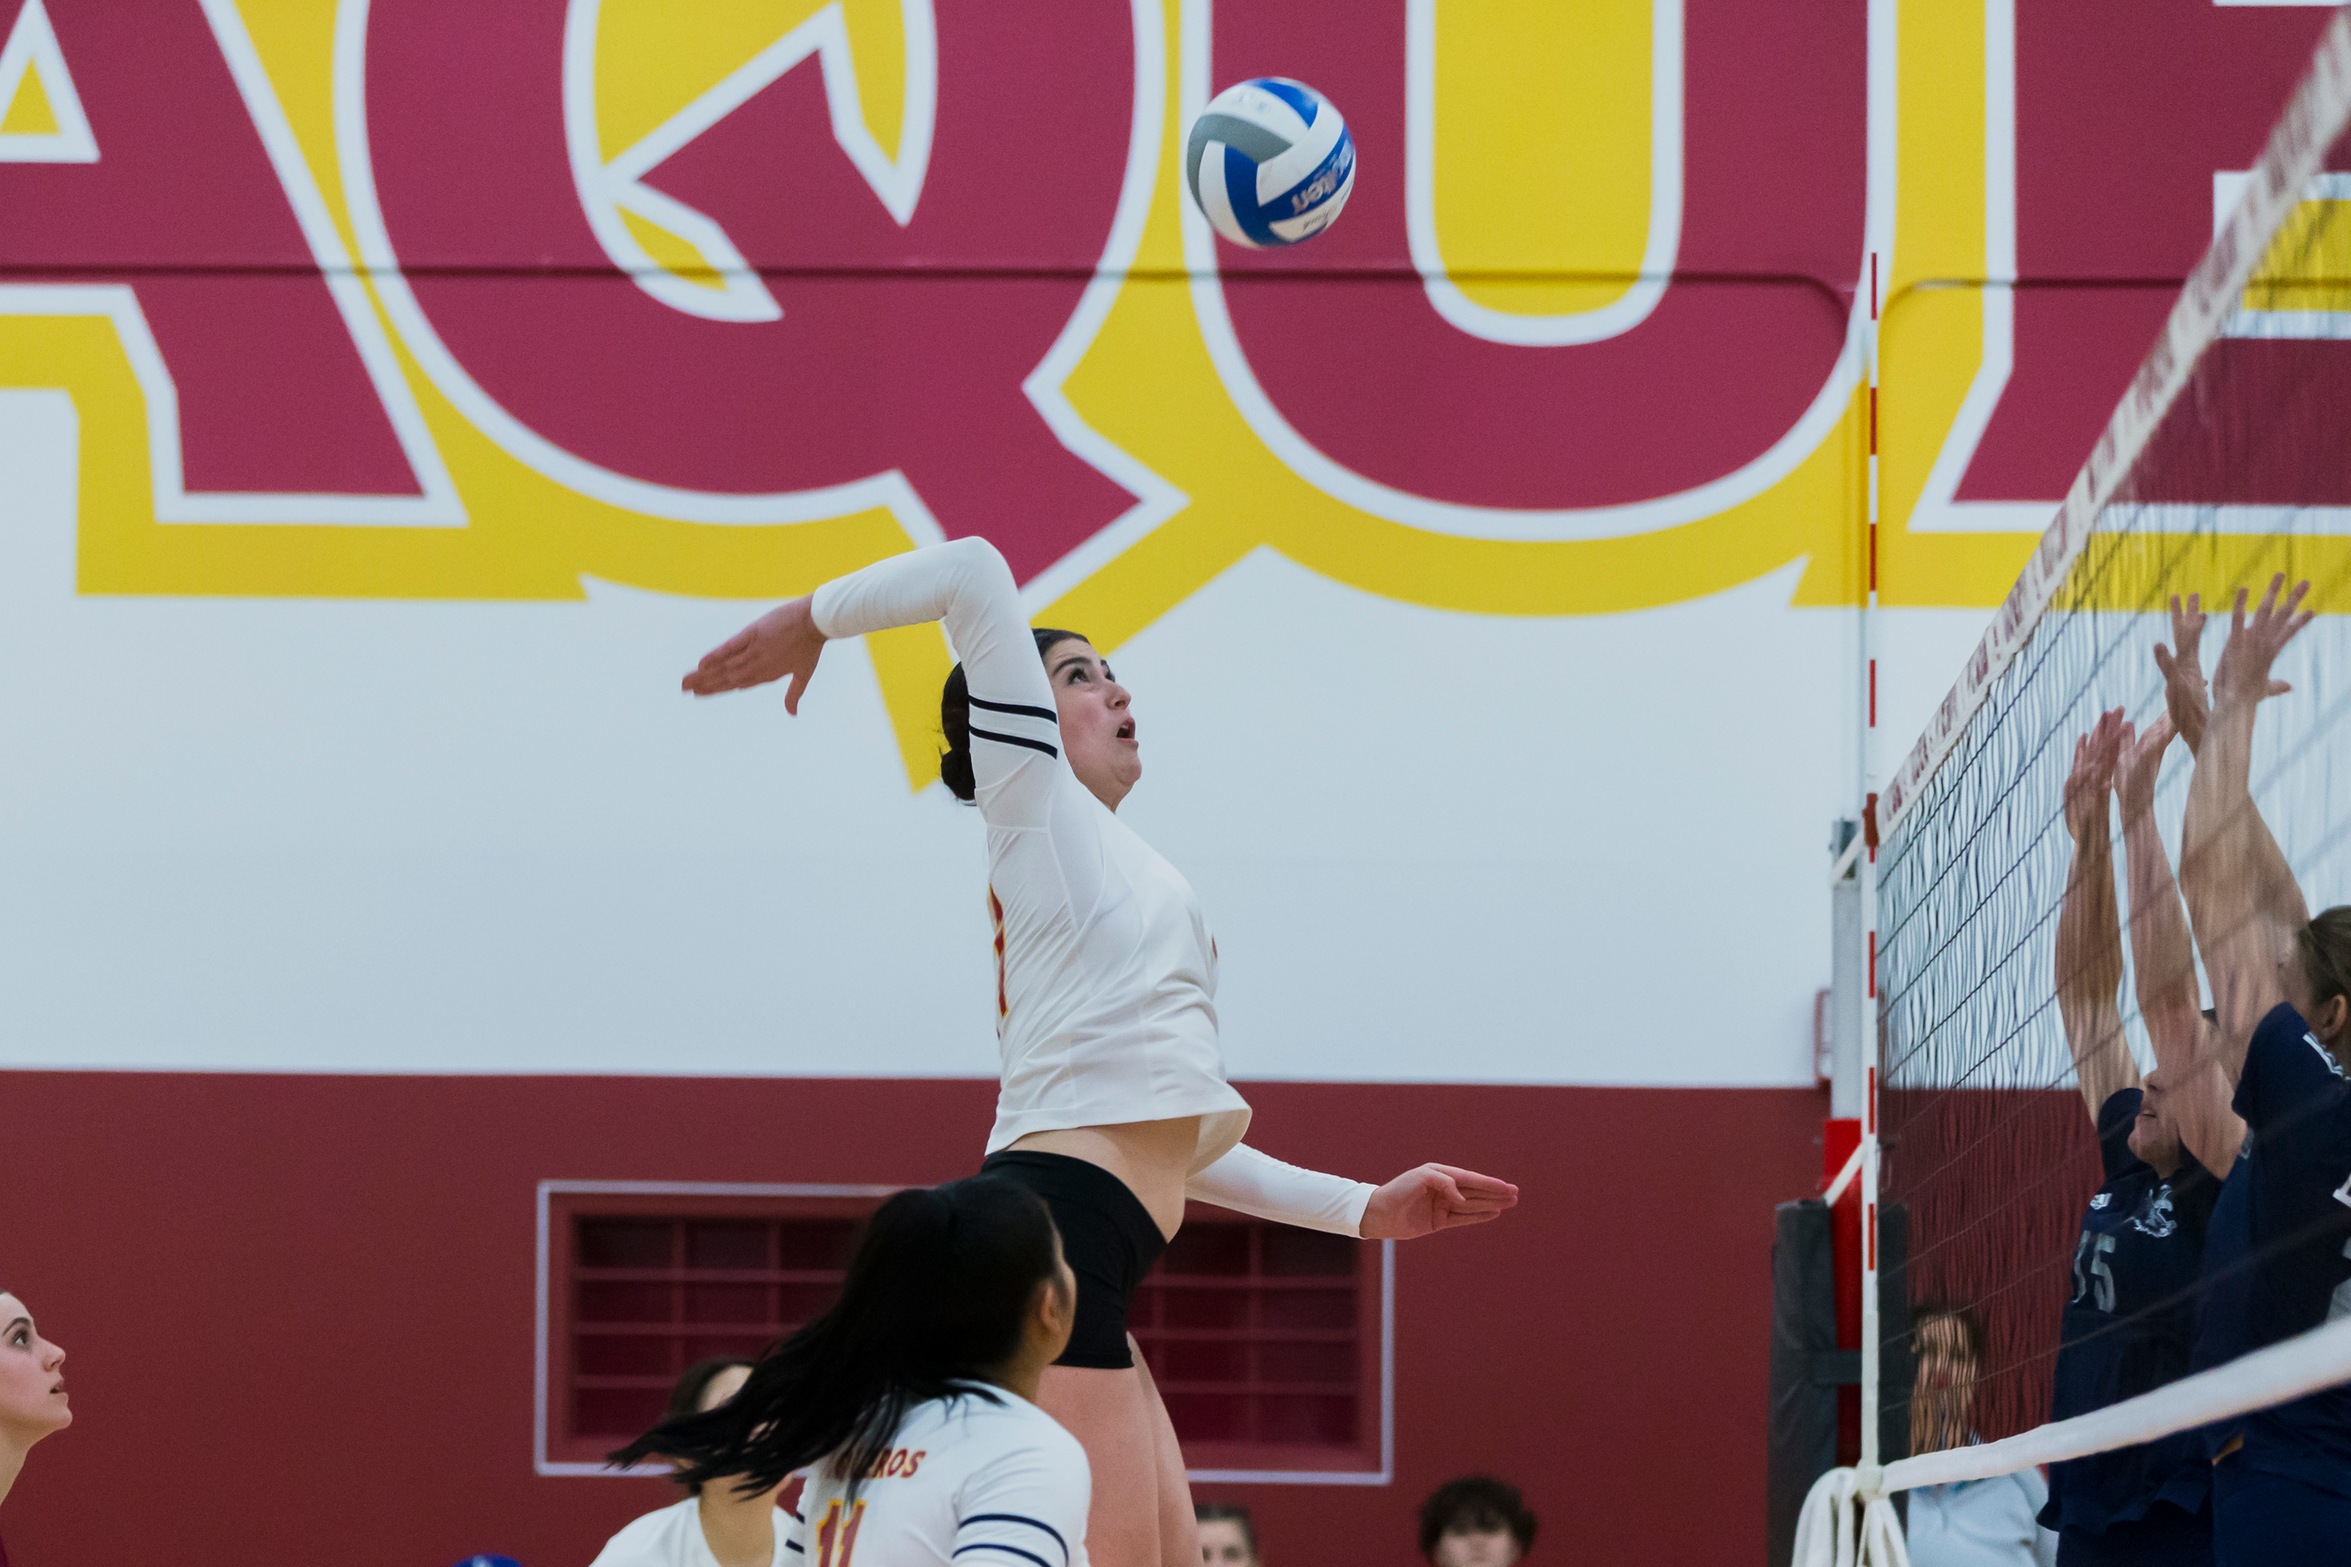 GCC Women's Volleyball split conference matches last week and are 1-1 in WSC play